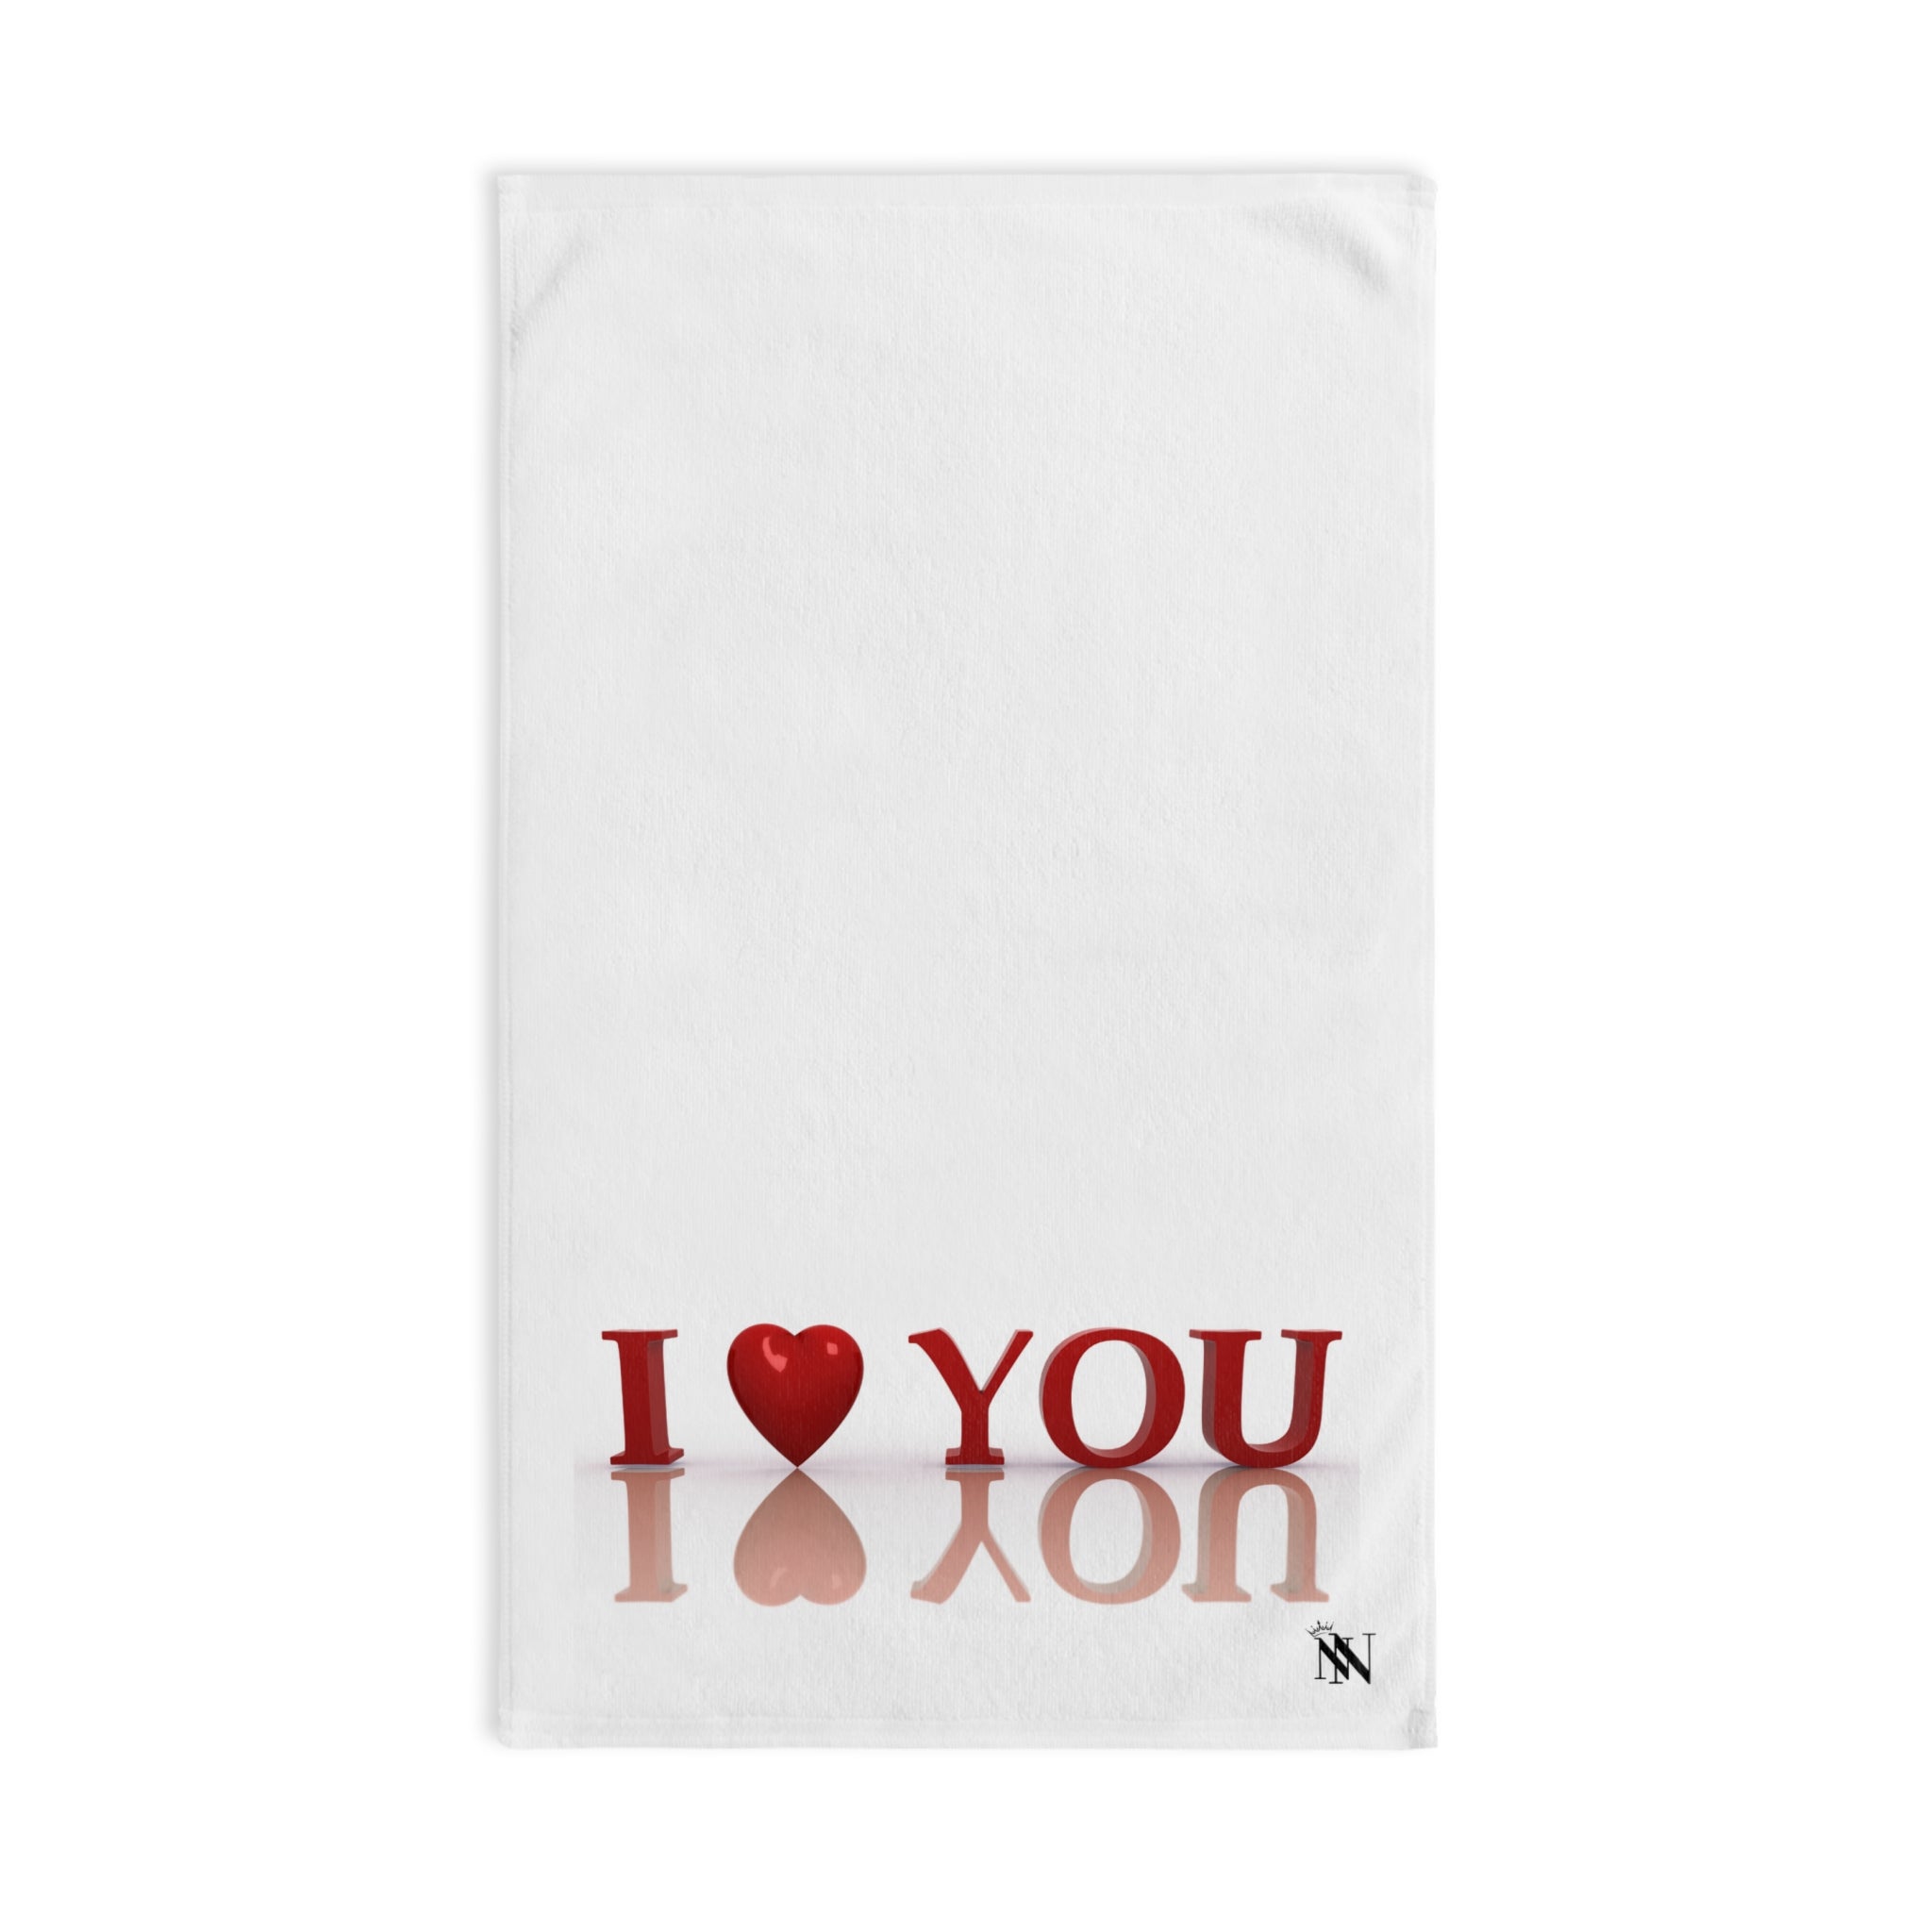 I Heart You 3D White | Funny Gifts for Men - Gifts for Him - Birthday Gifts for Men, Him, Her, Husband, Boyfriend, Girlfriend, New Couple Gifts, Fathers & Valentines Day Gifts, Christmas Gifts NECTAR NAPKINS